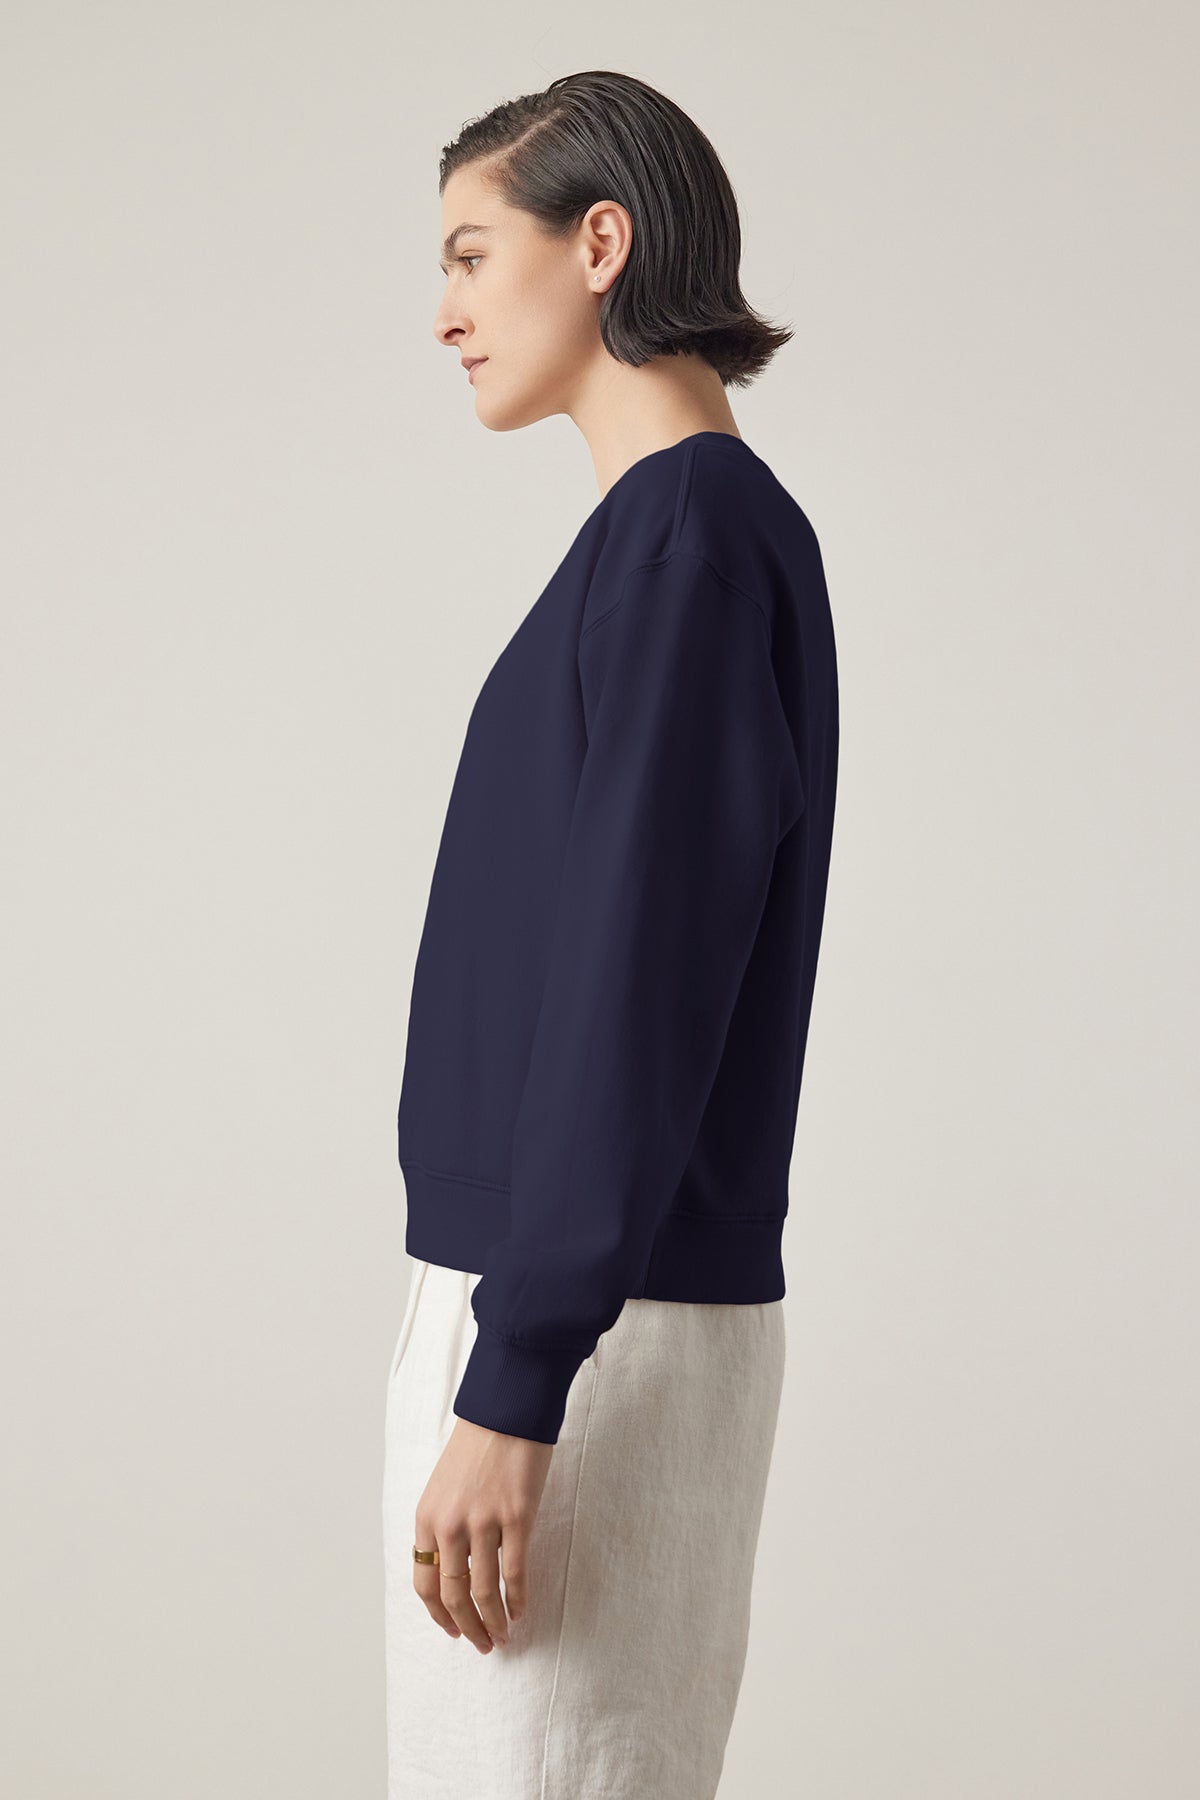 Side profile of a person with slicked-back hair wearing a Navy YNEZ SWEATSHIRT made by Velvet by Jenny Graham and light trousers against a neutral background.-36909403177153